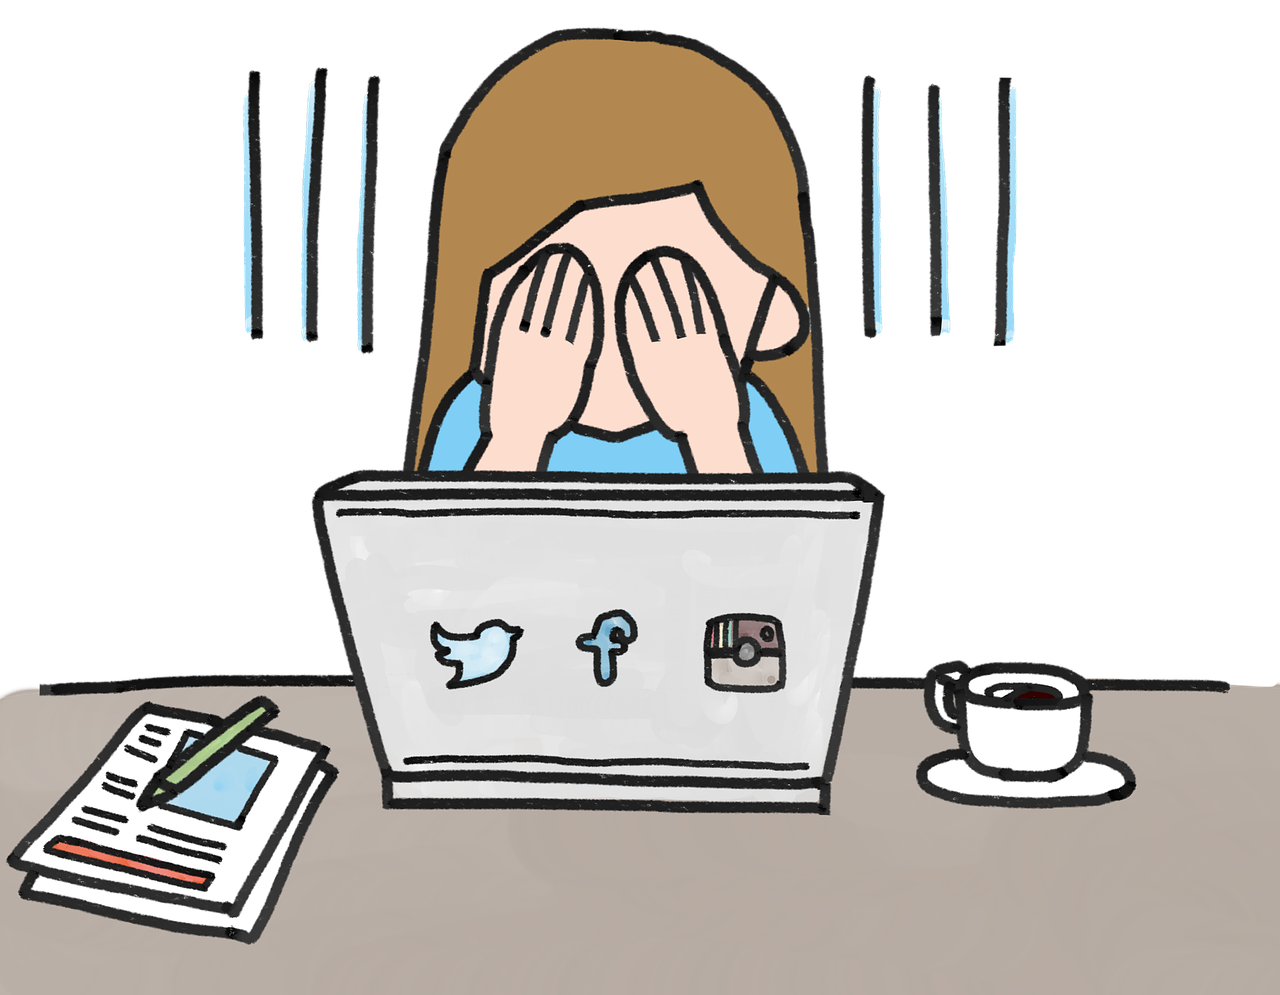 cartoon of a woman covering her eyes in sadness or frustration while sitting at a laptop